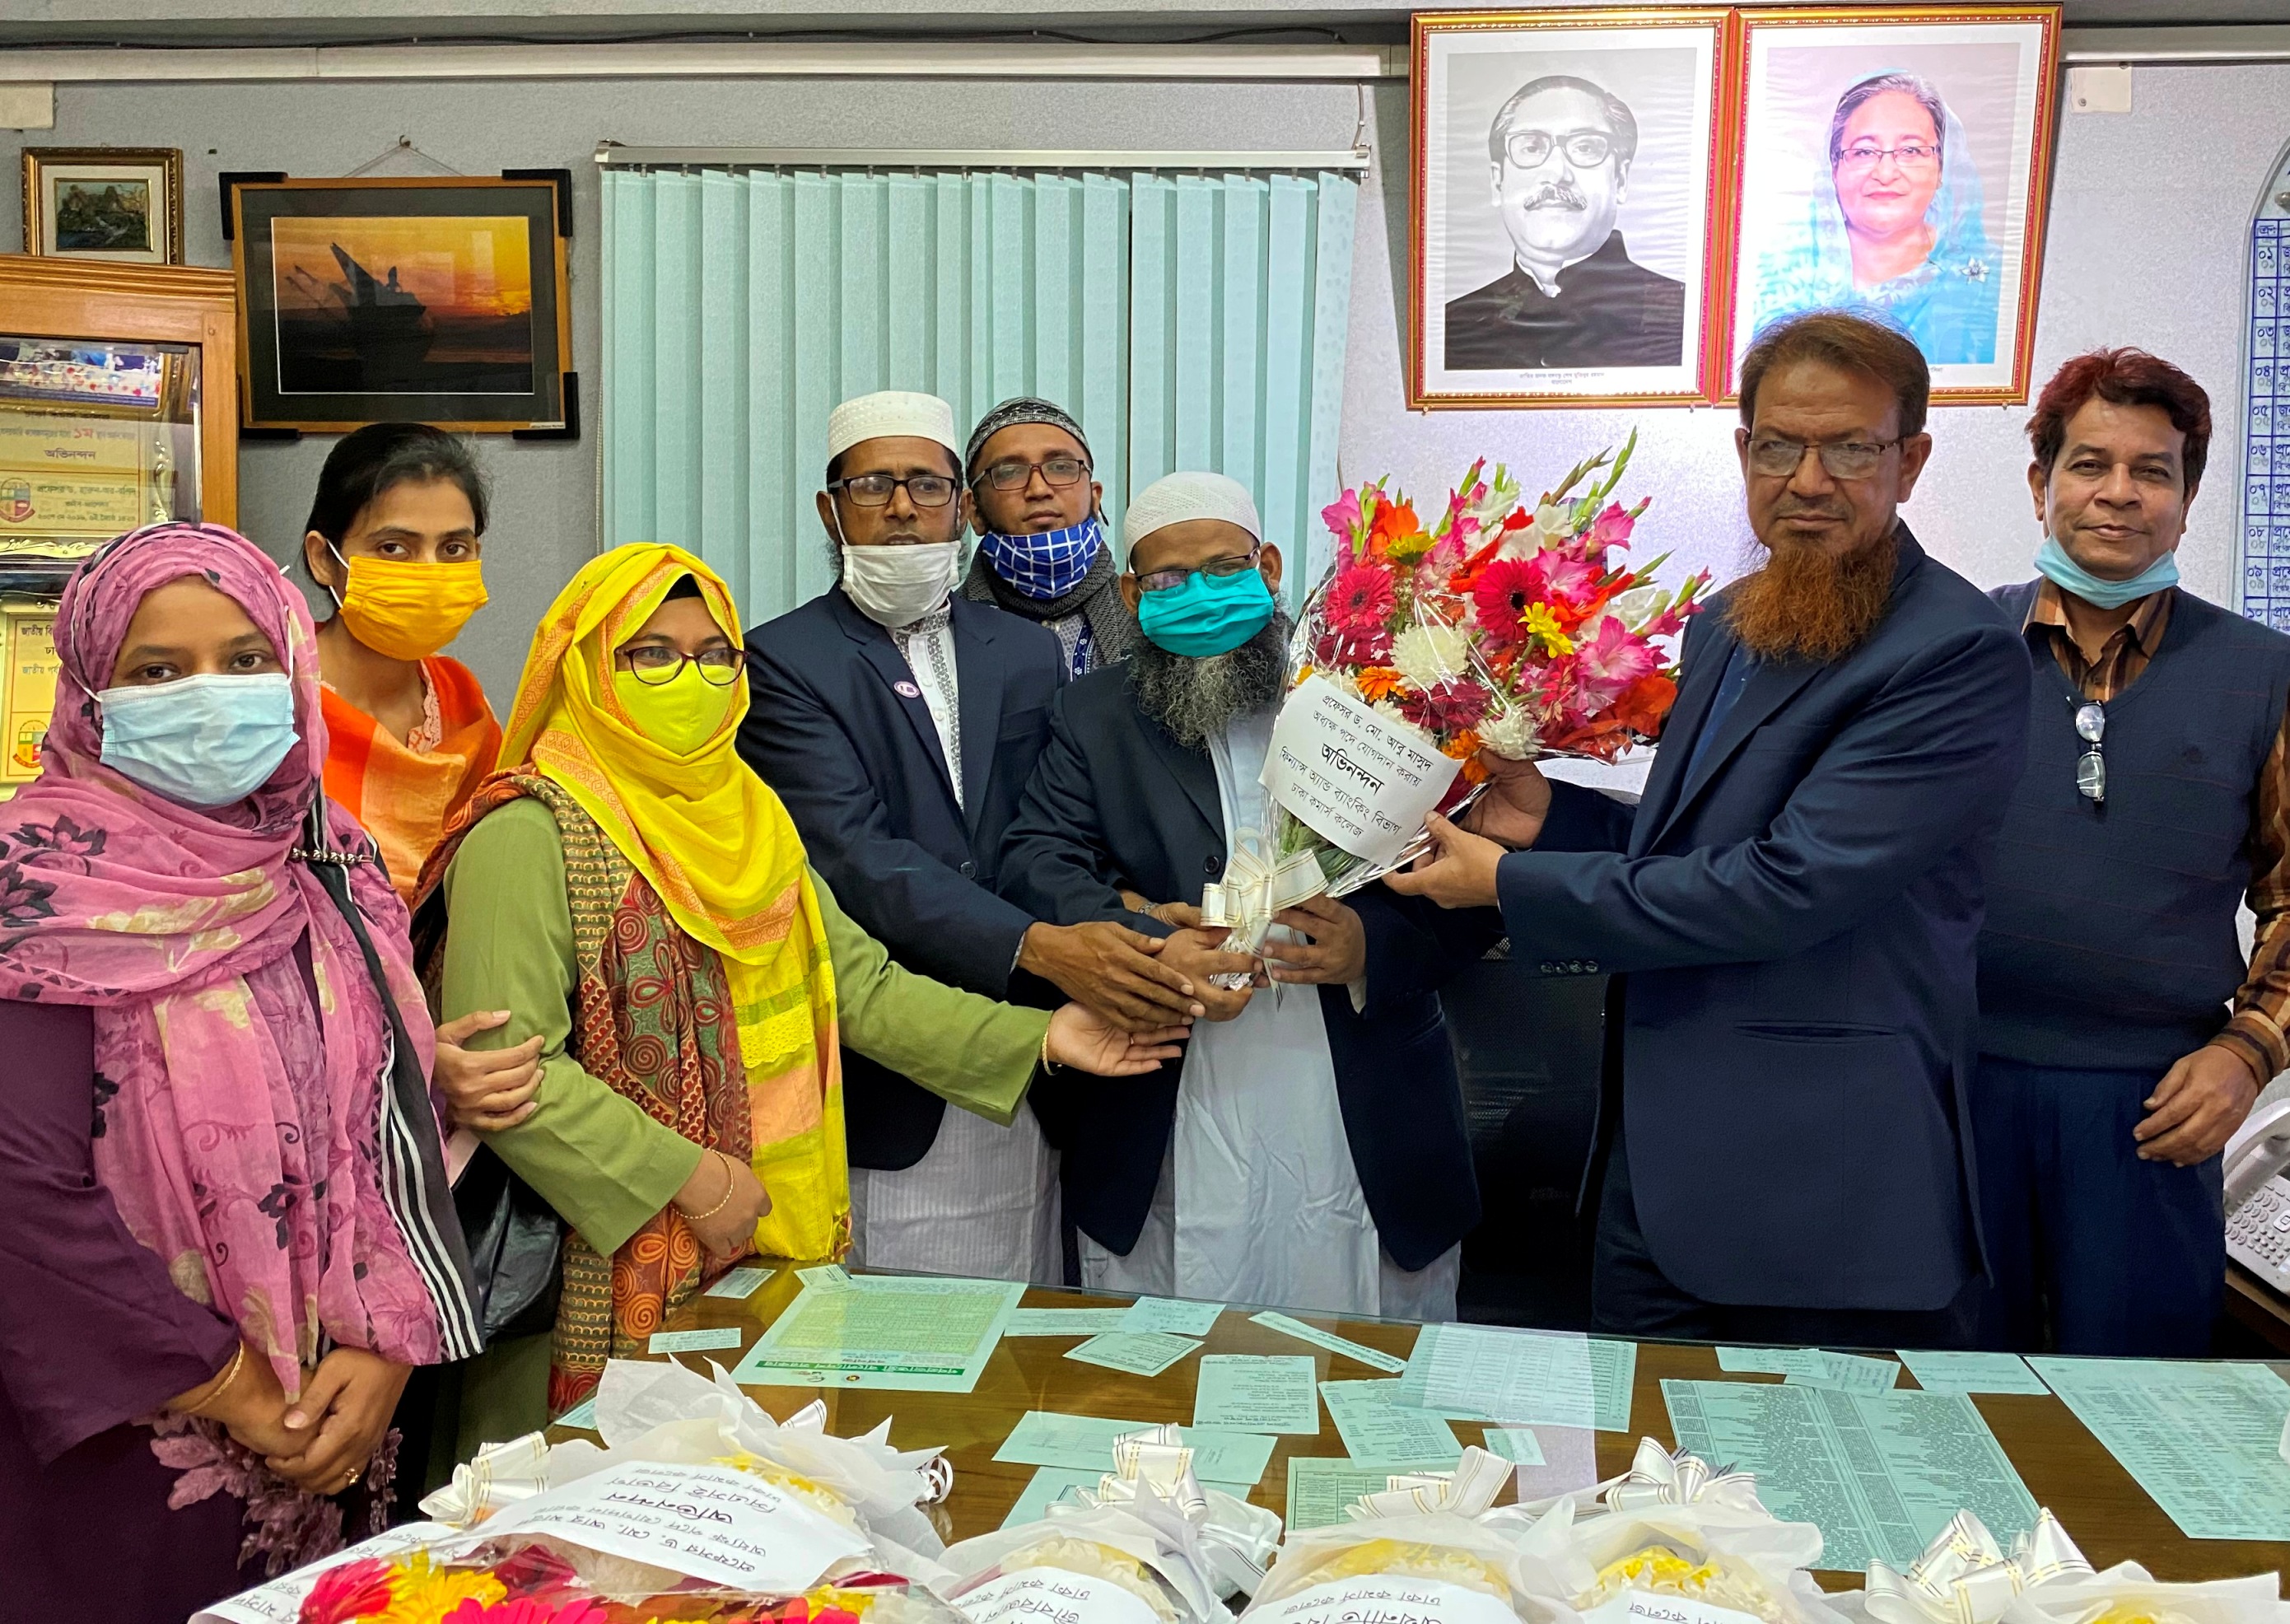 Reception to Principal Prof. Dr. Md. Abu Masud by Finance & Banking Department